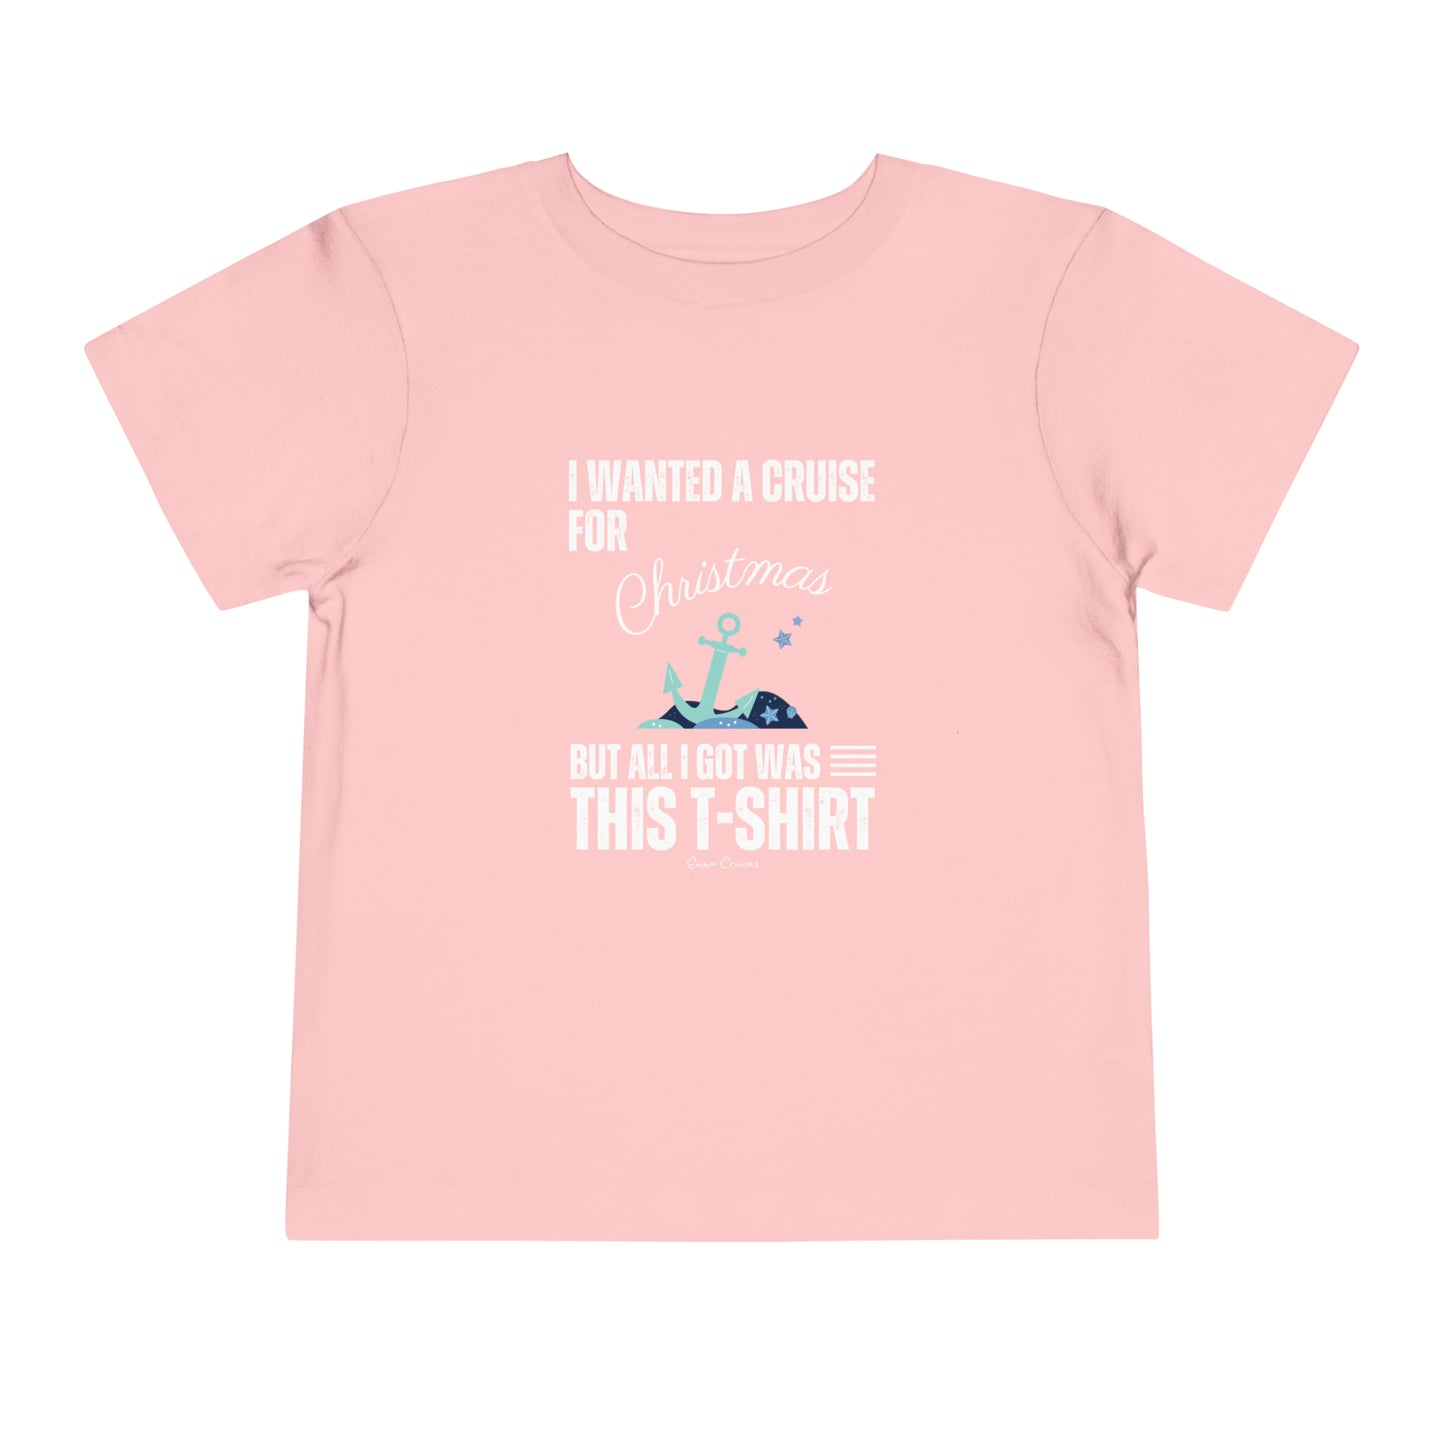 I Wanted a Cruise for Christmas - Toddler UNISEX T-Shirt